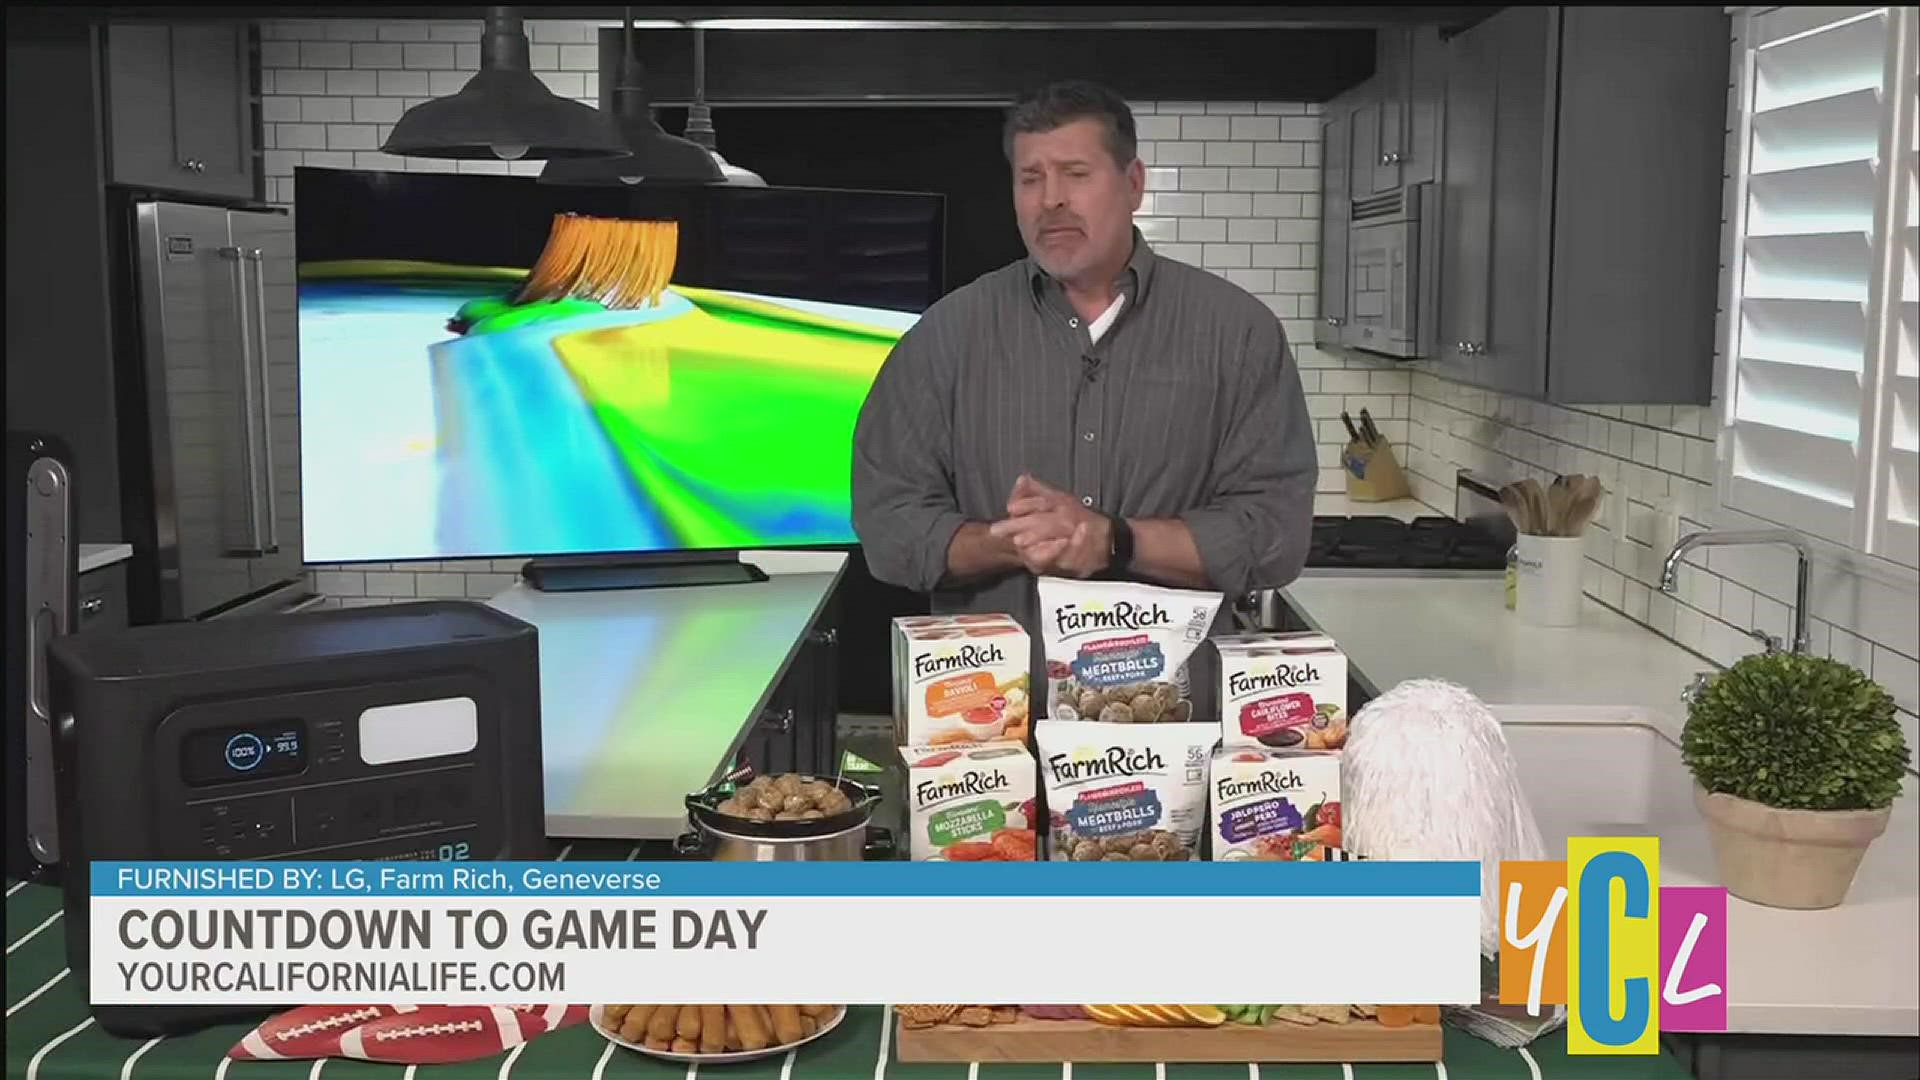 The big football game of the year is almost here! We got some tips on how to have a winning football party. This segment is paid by LG, FarmRich, and Geneverse.